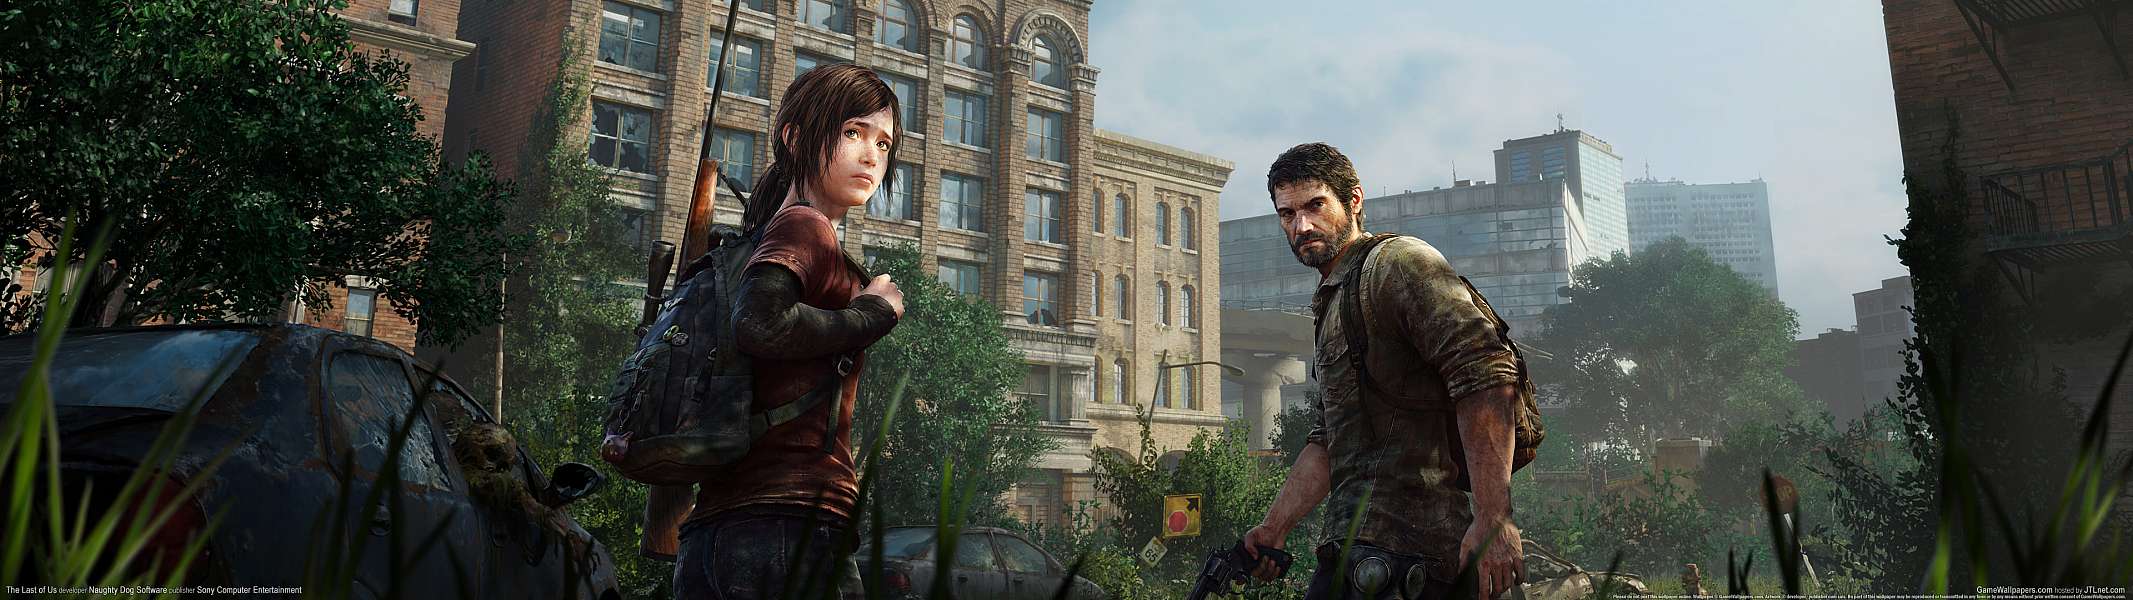 The Last of Us dual screen achtergrond